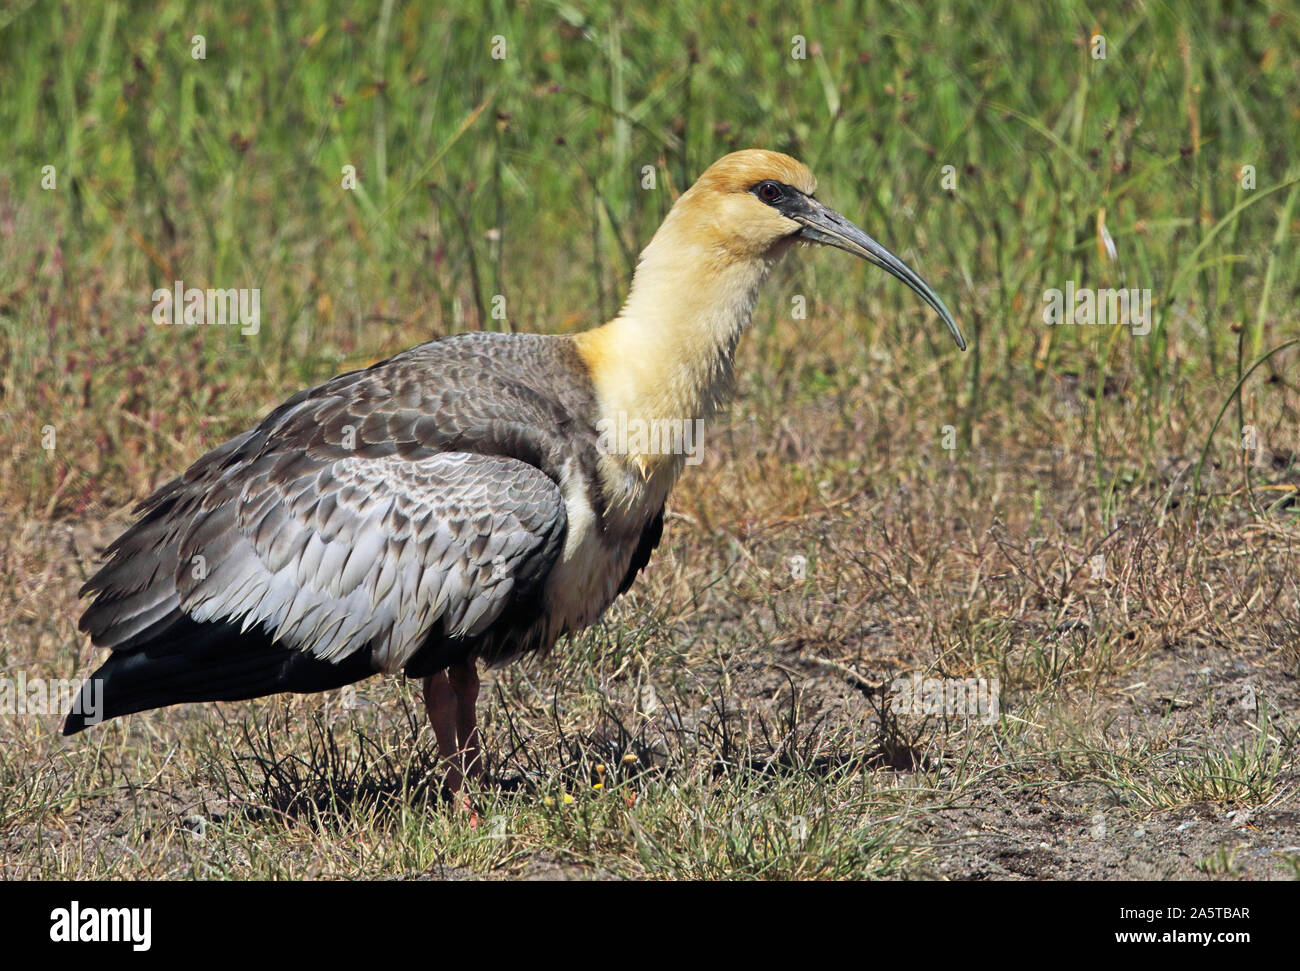 Black-faced Ibis (Theristicus melanopis) adult standing on grass  Puerto Montt, Chile                    January Stock Photo